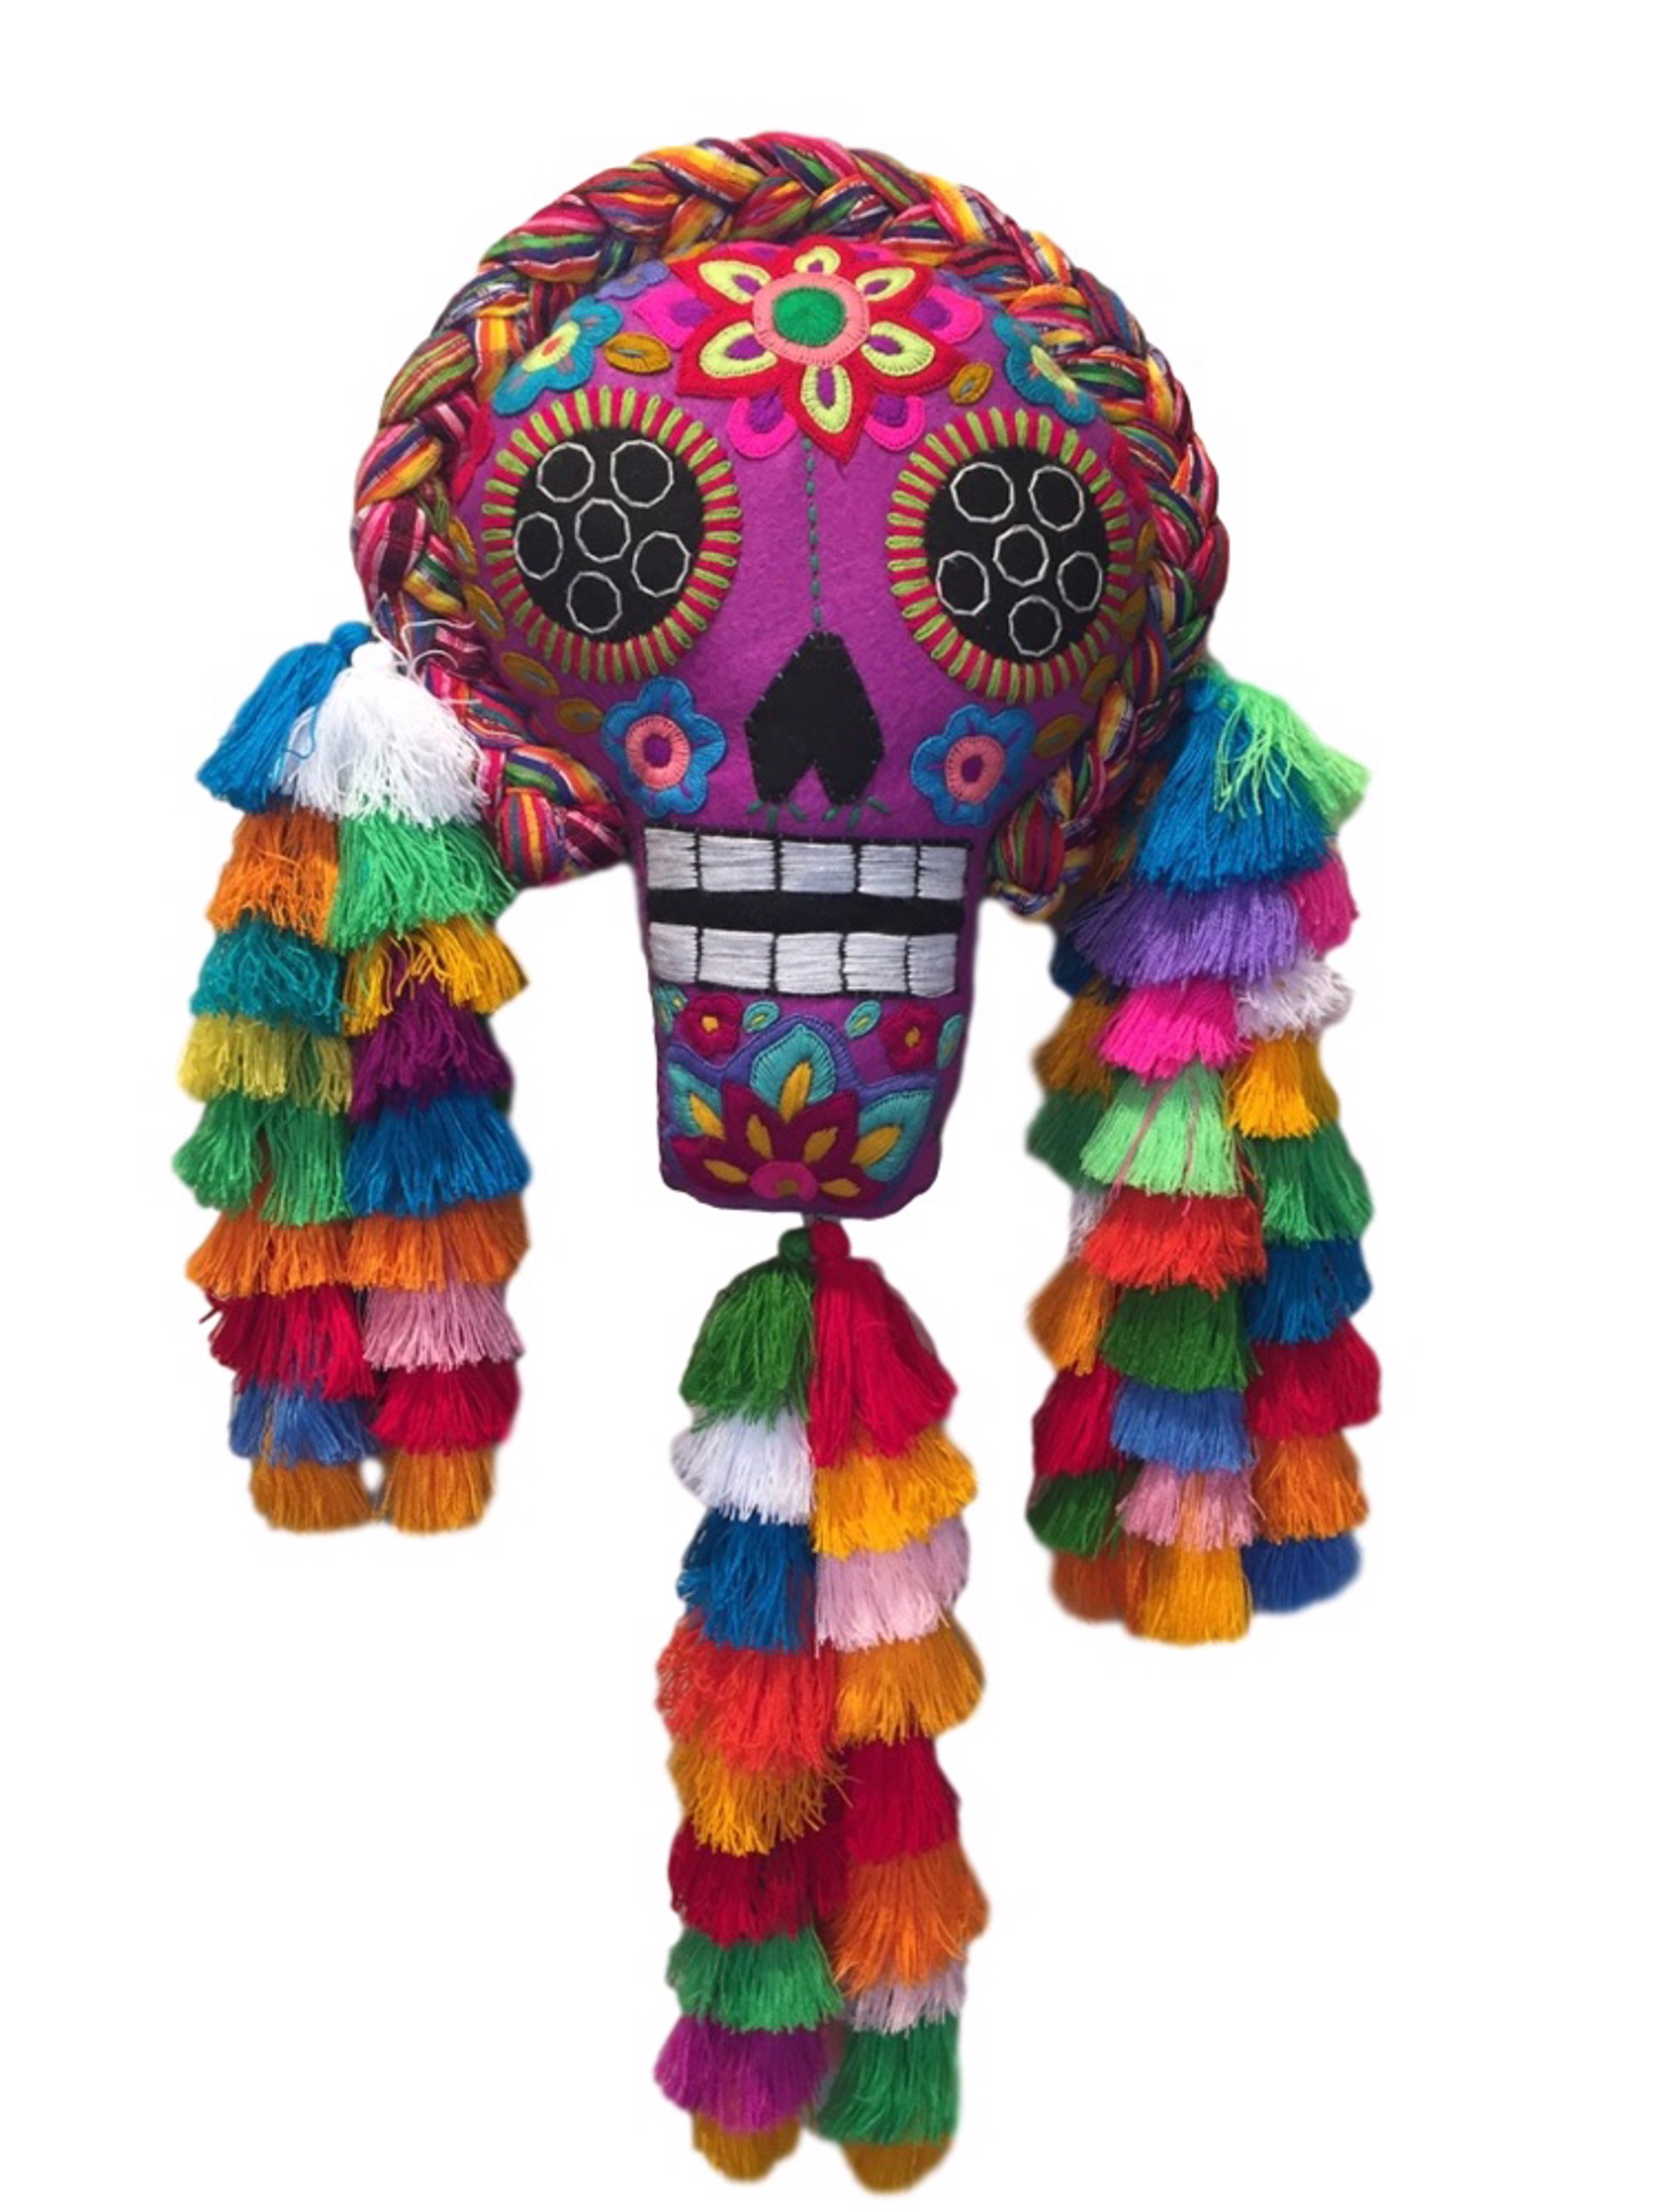 Giant Embroidered Sugar Skull with Braid + Tassels - Assorted by Indigo Desert Ranch - Day of the Dead